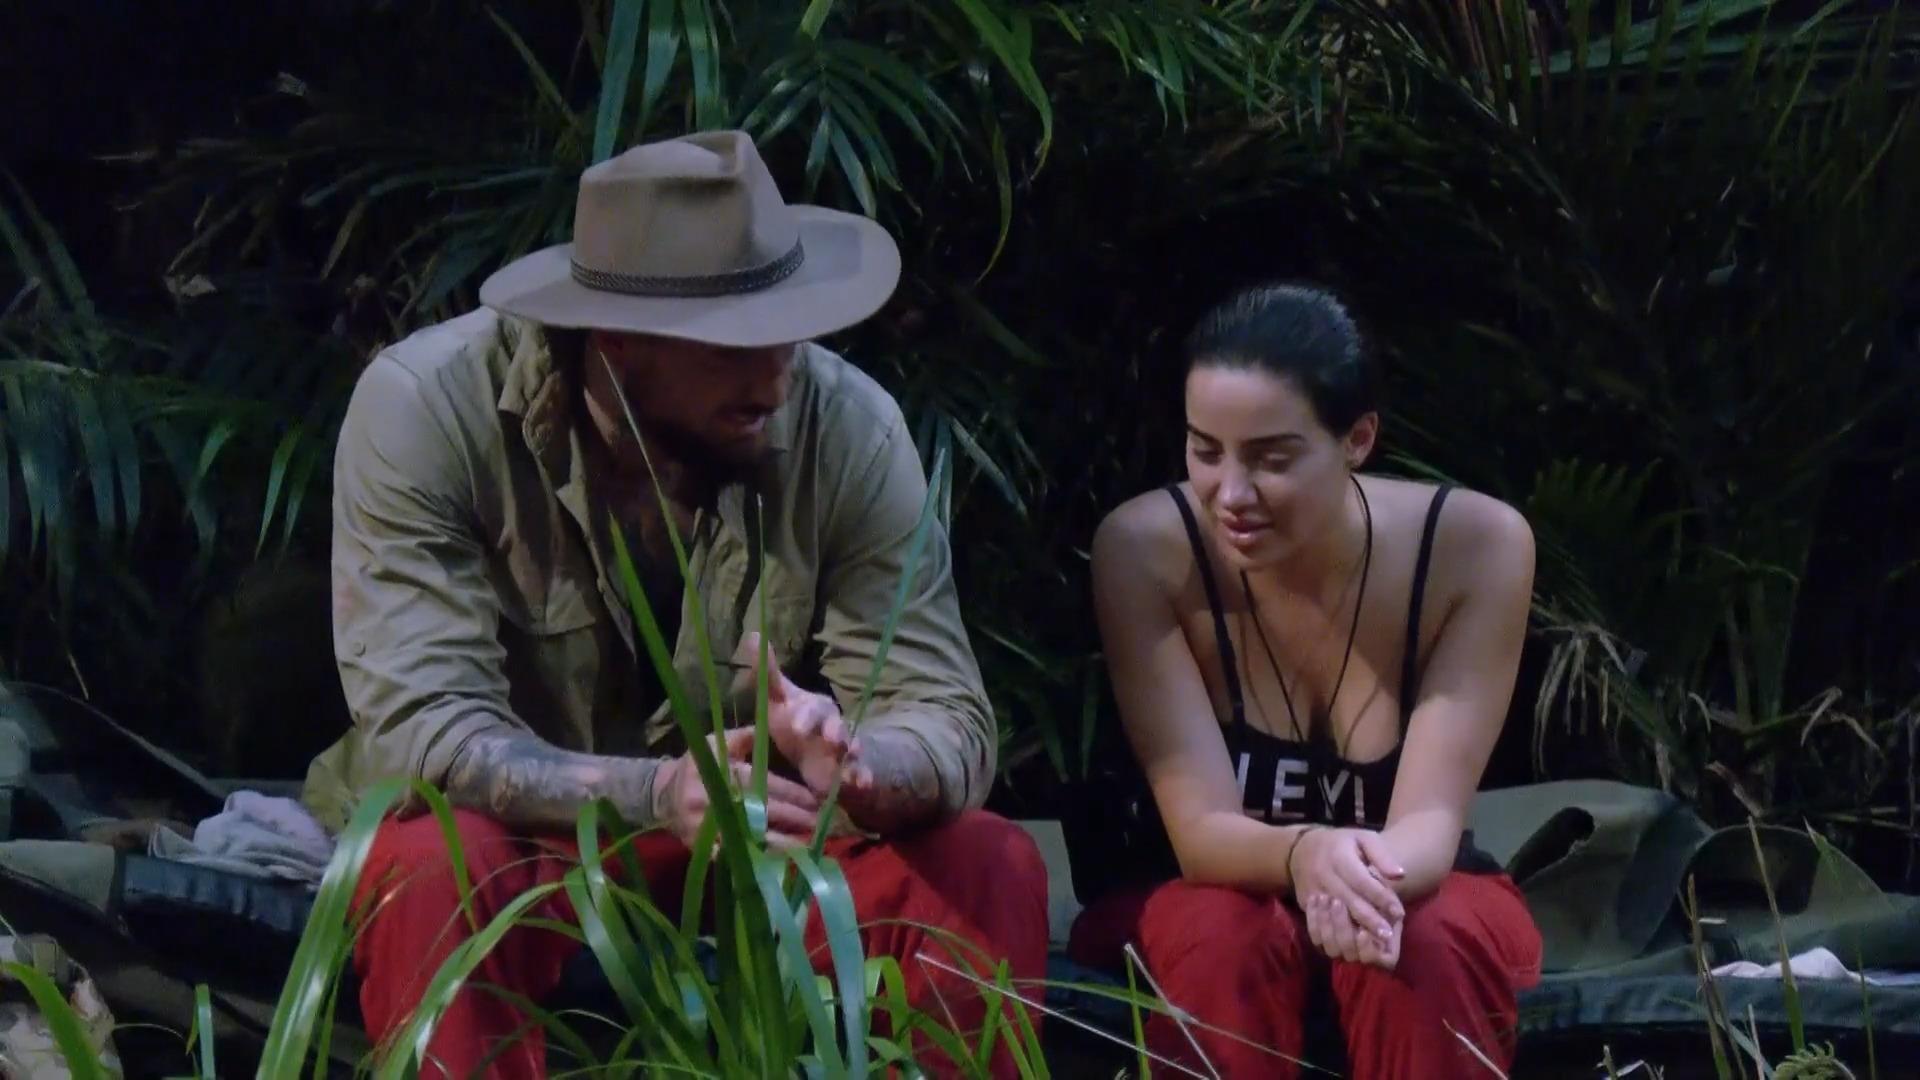 “That’s it for now!": Mike dumps Leyla No happy ending in the jungle